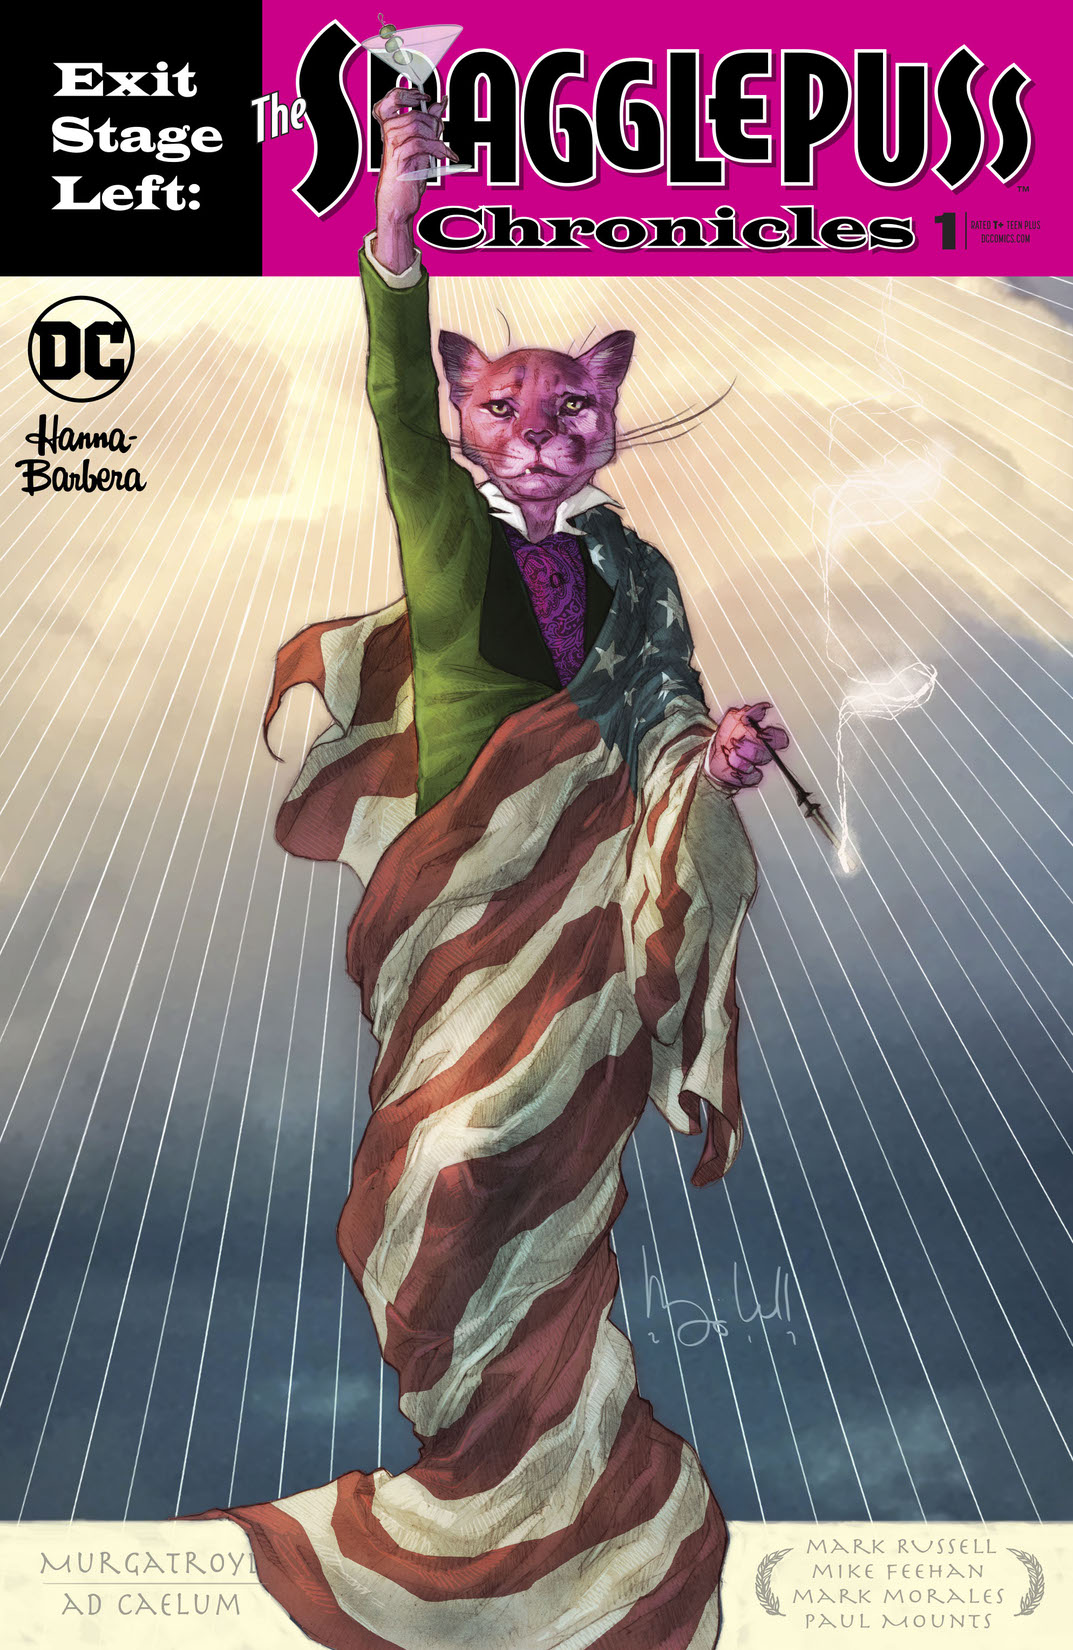 Exit Stage Left: The Snagglepuss Chronicles #1 preview images